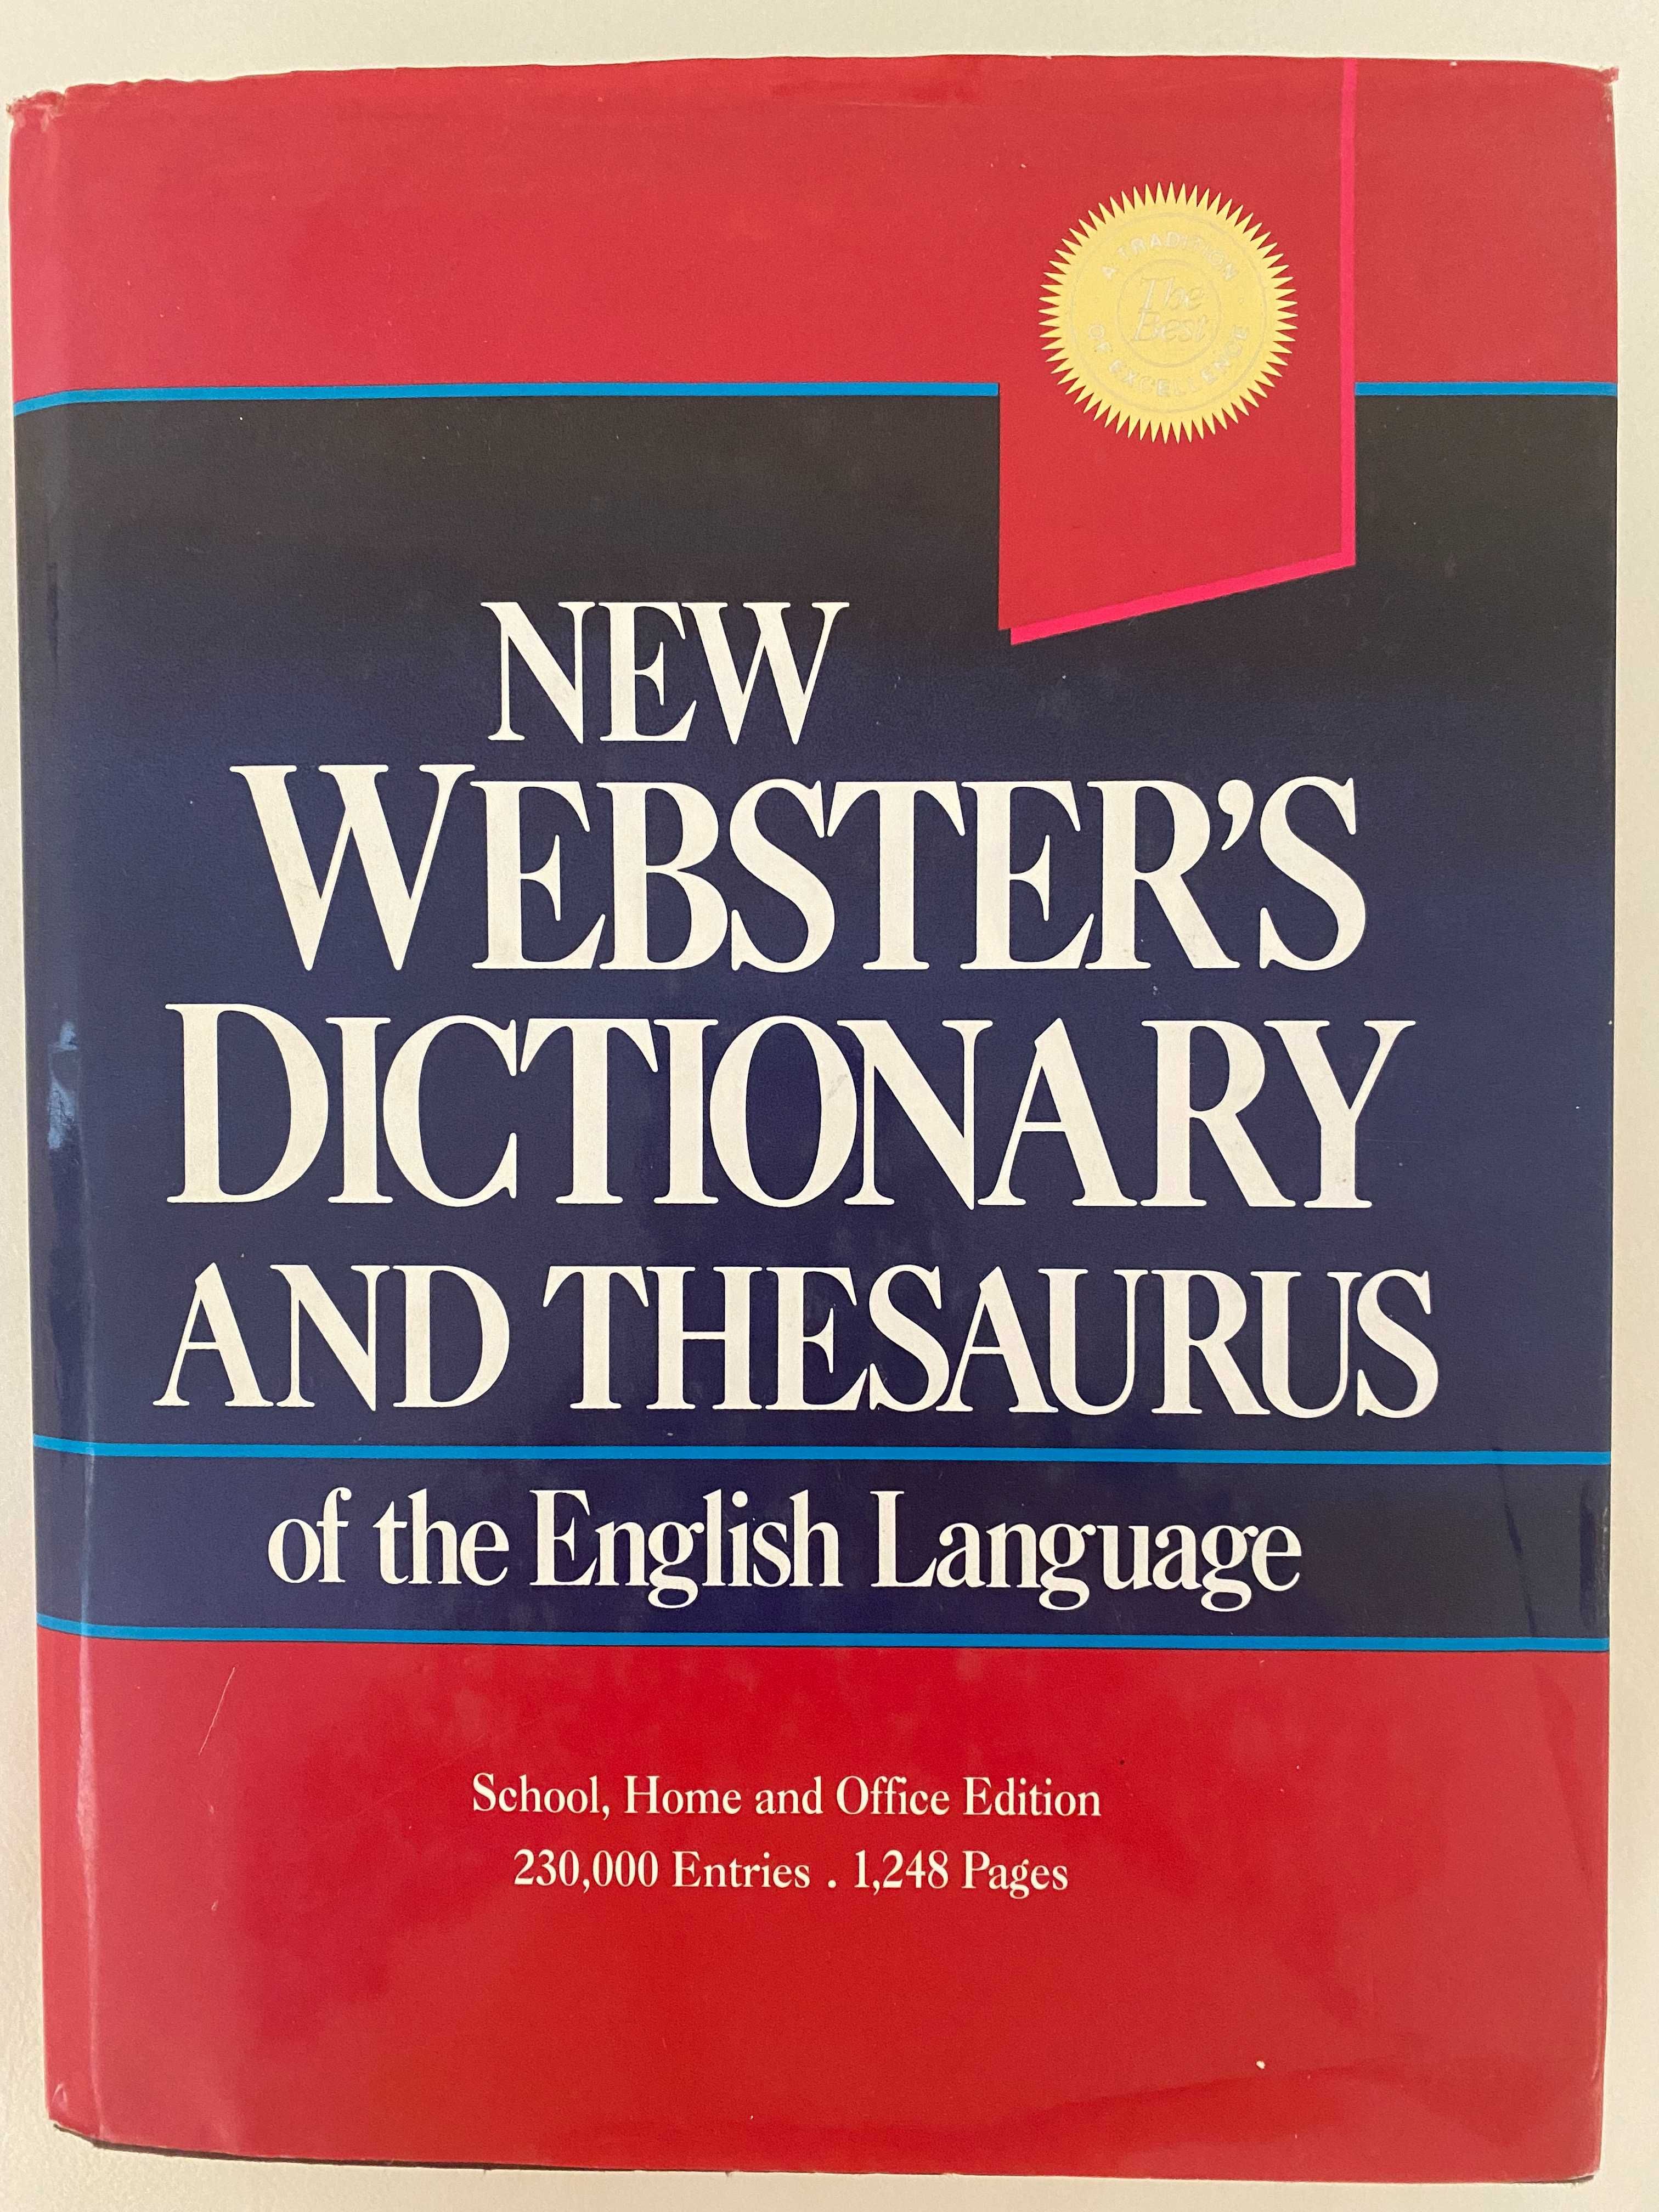 New Webster's Dictionary And Thesaurus Of The English Language